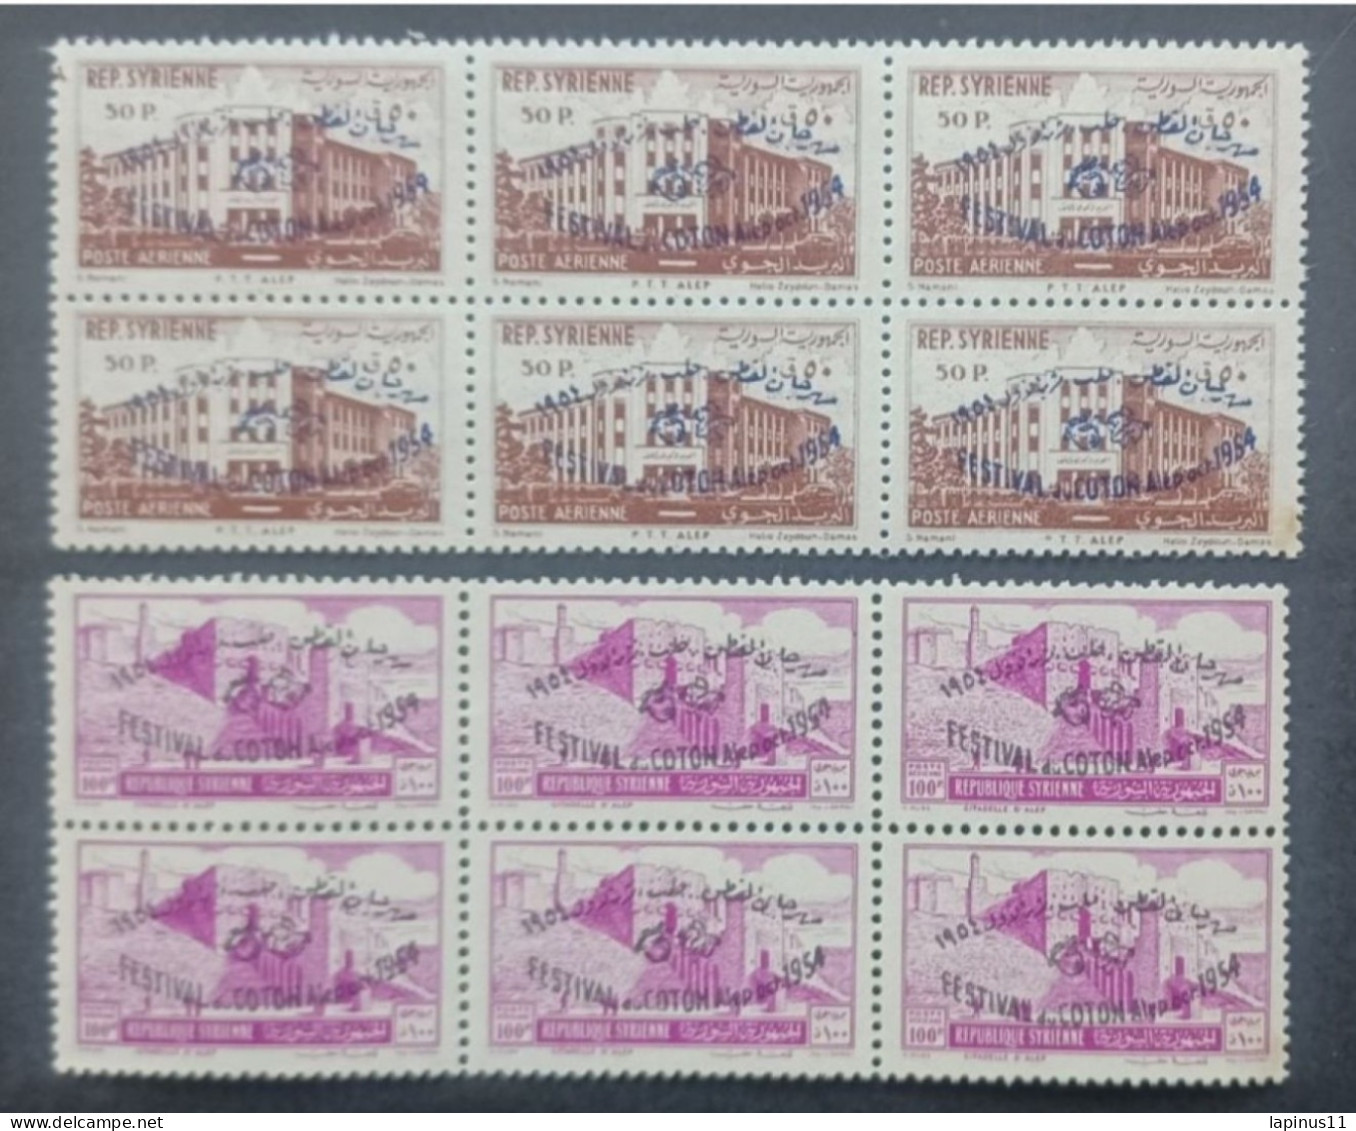 SYRIE سوريا SYRIA 1954 AIRMAIL COTTON FESTIVAL CAT YVERT N 54/55 - Syrien